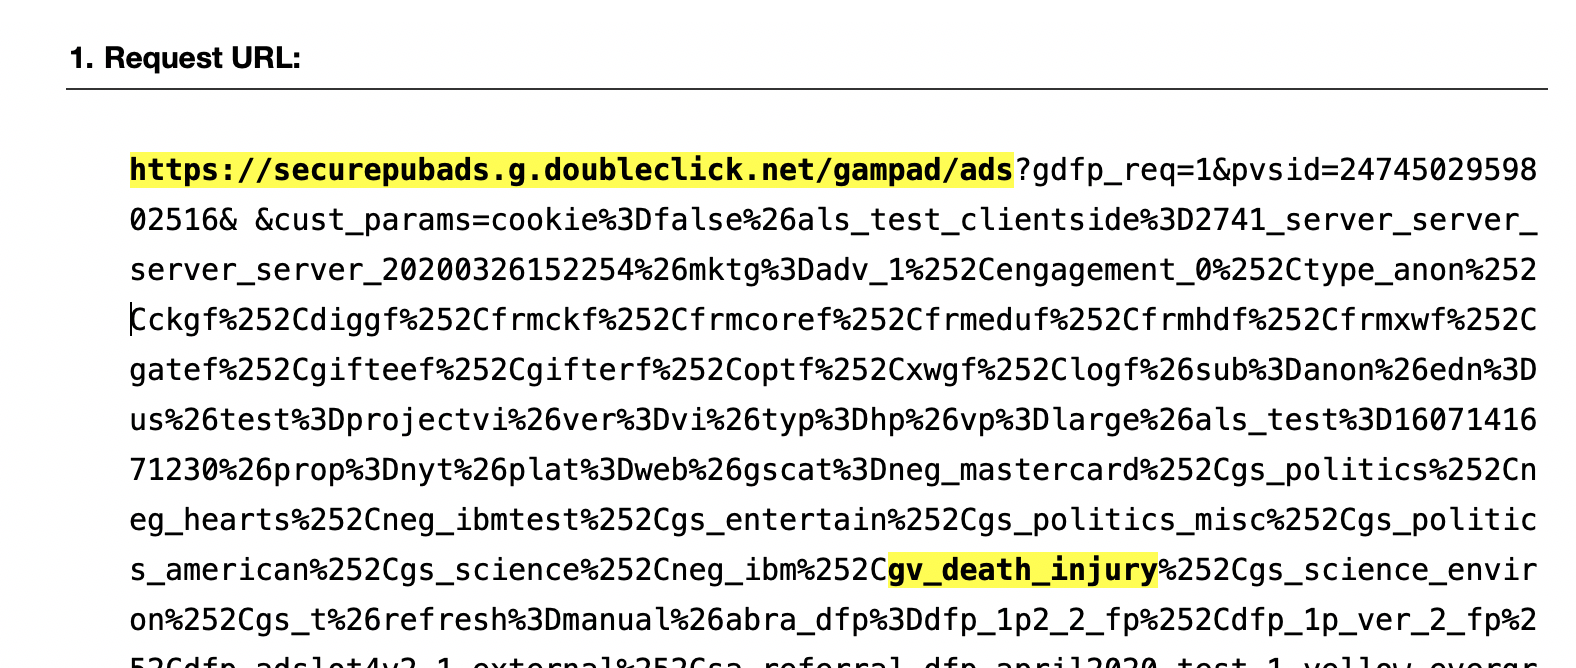 Screenshot of a network request call made to doubleclick.net, with brand safety values passed as query string parameters